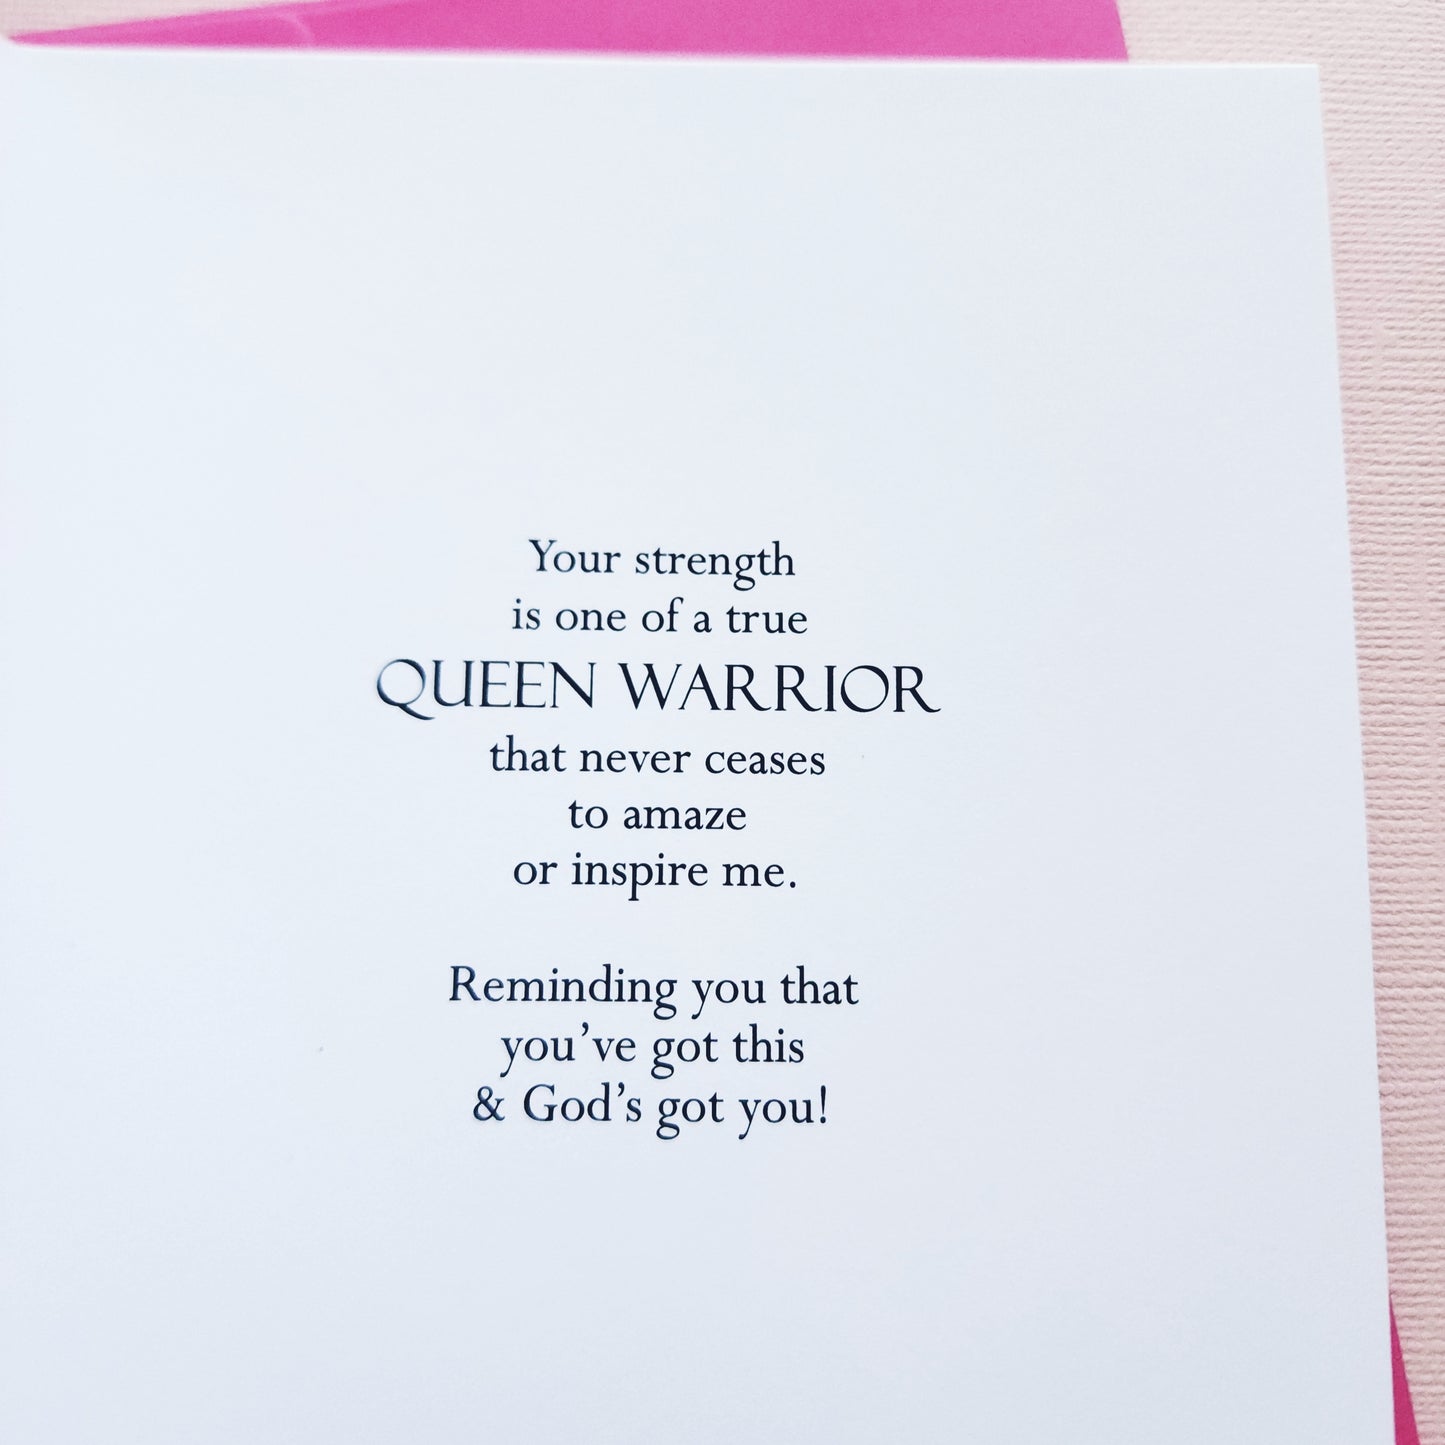 I Win! - Cancer fighting Encouragment Card